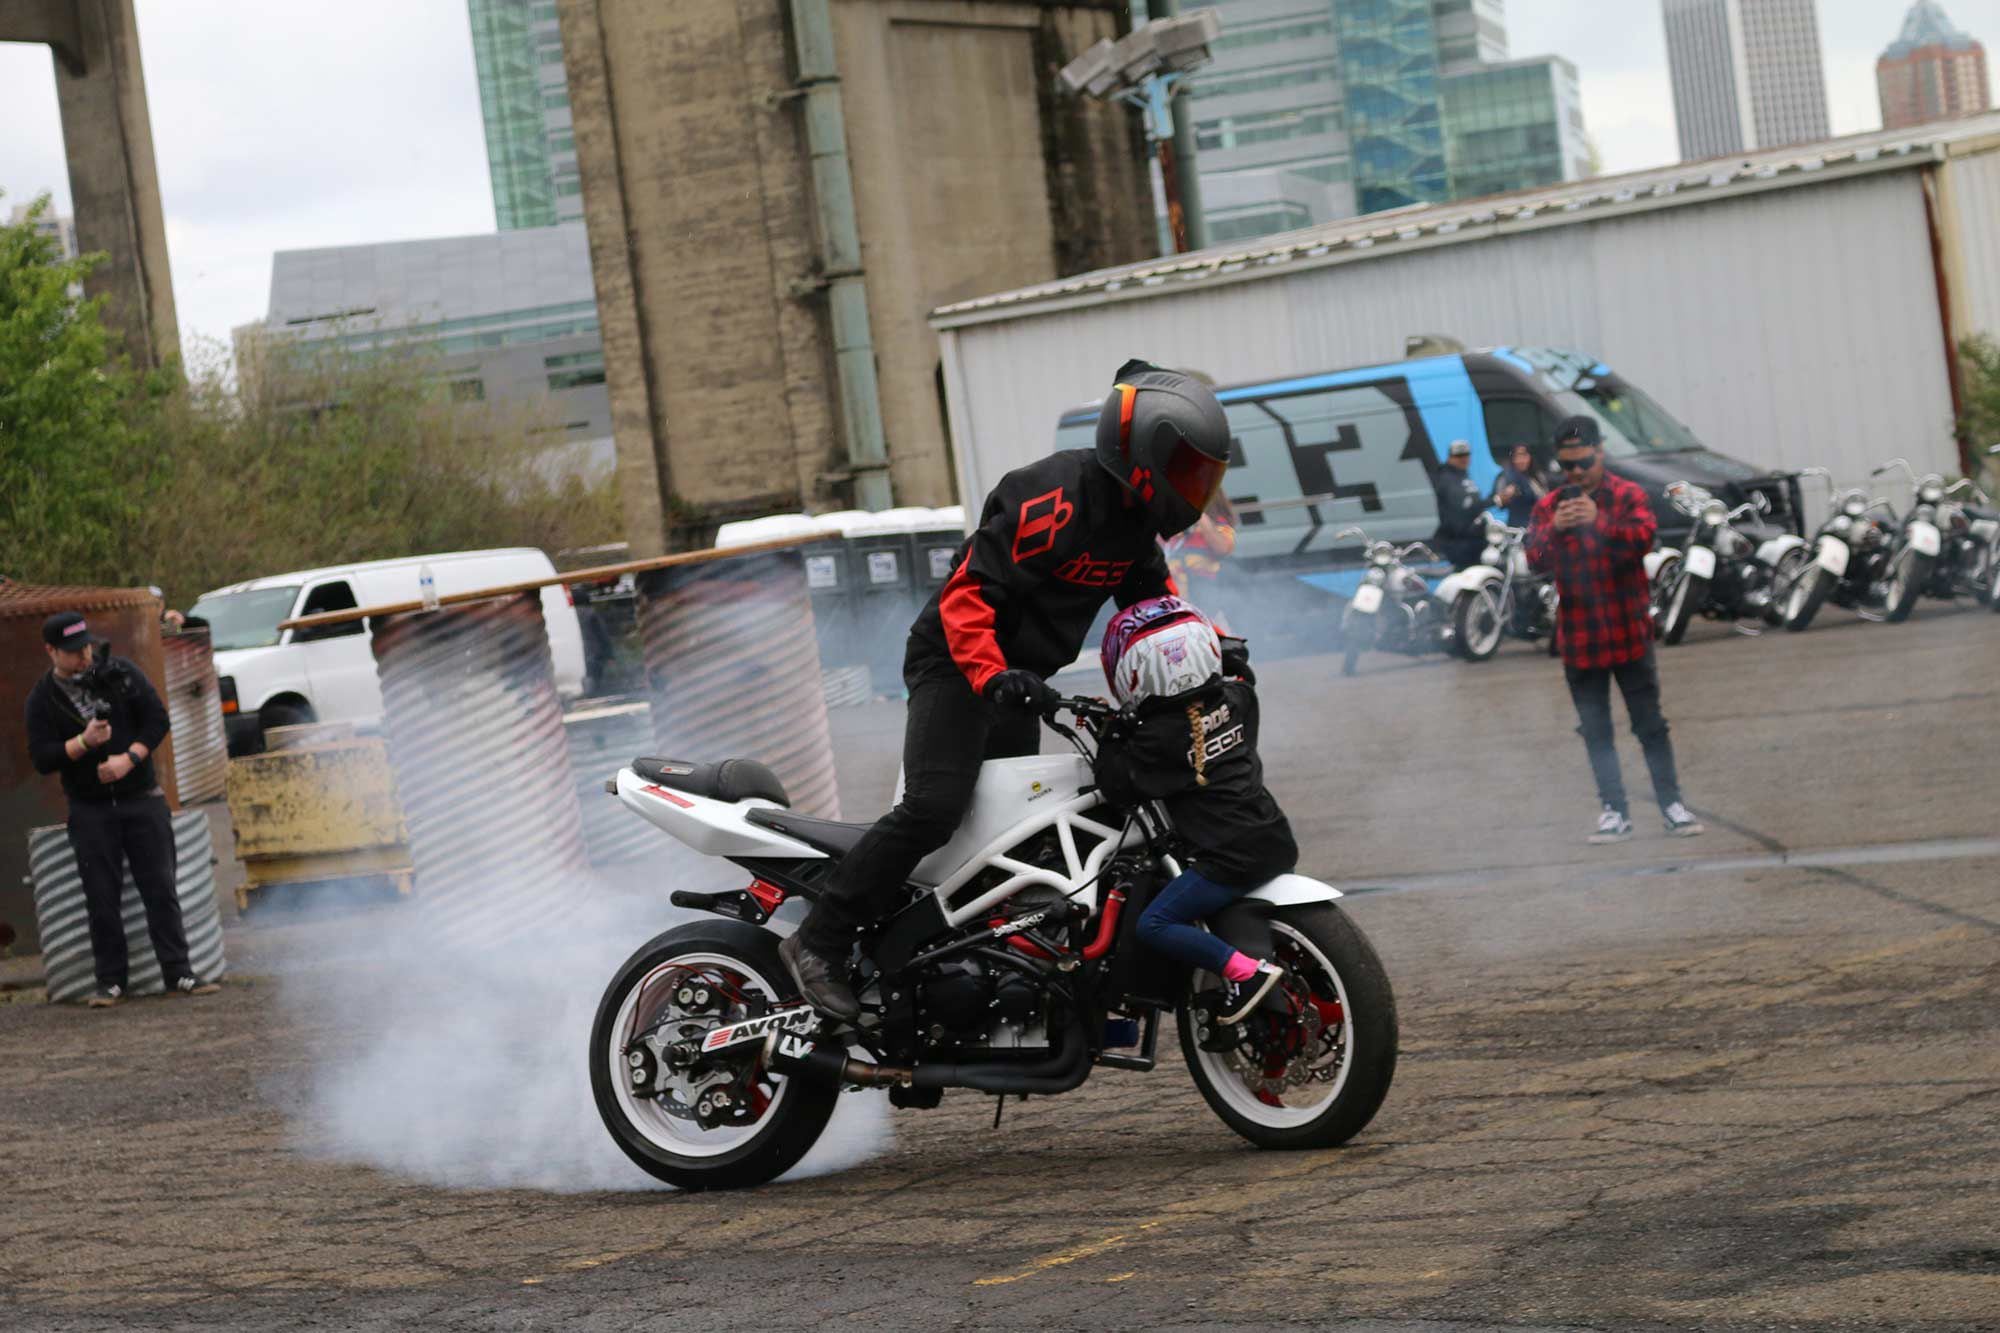 Stunt rider Sean Sets and daughter Jade drew loud cheers from the crowd with their first public performance.